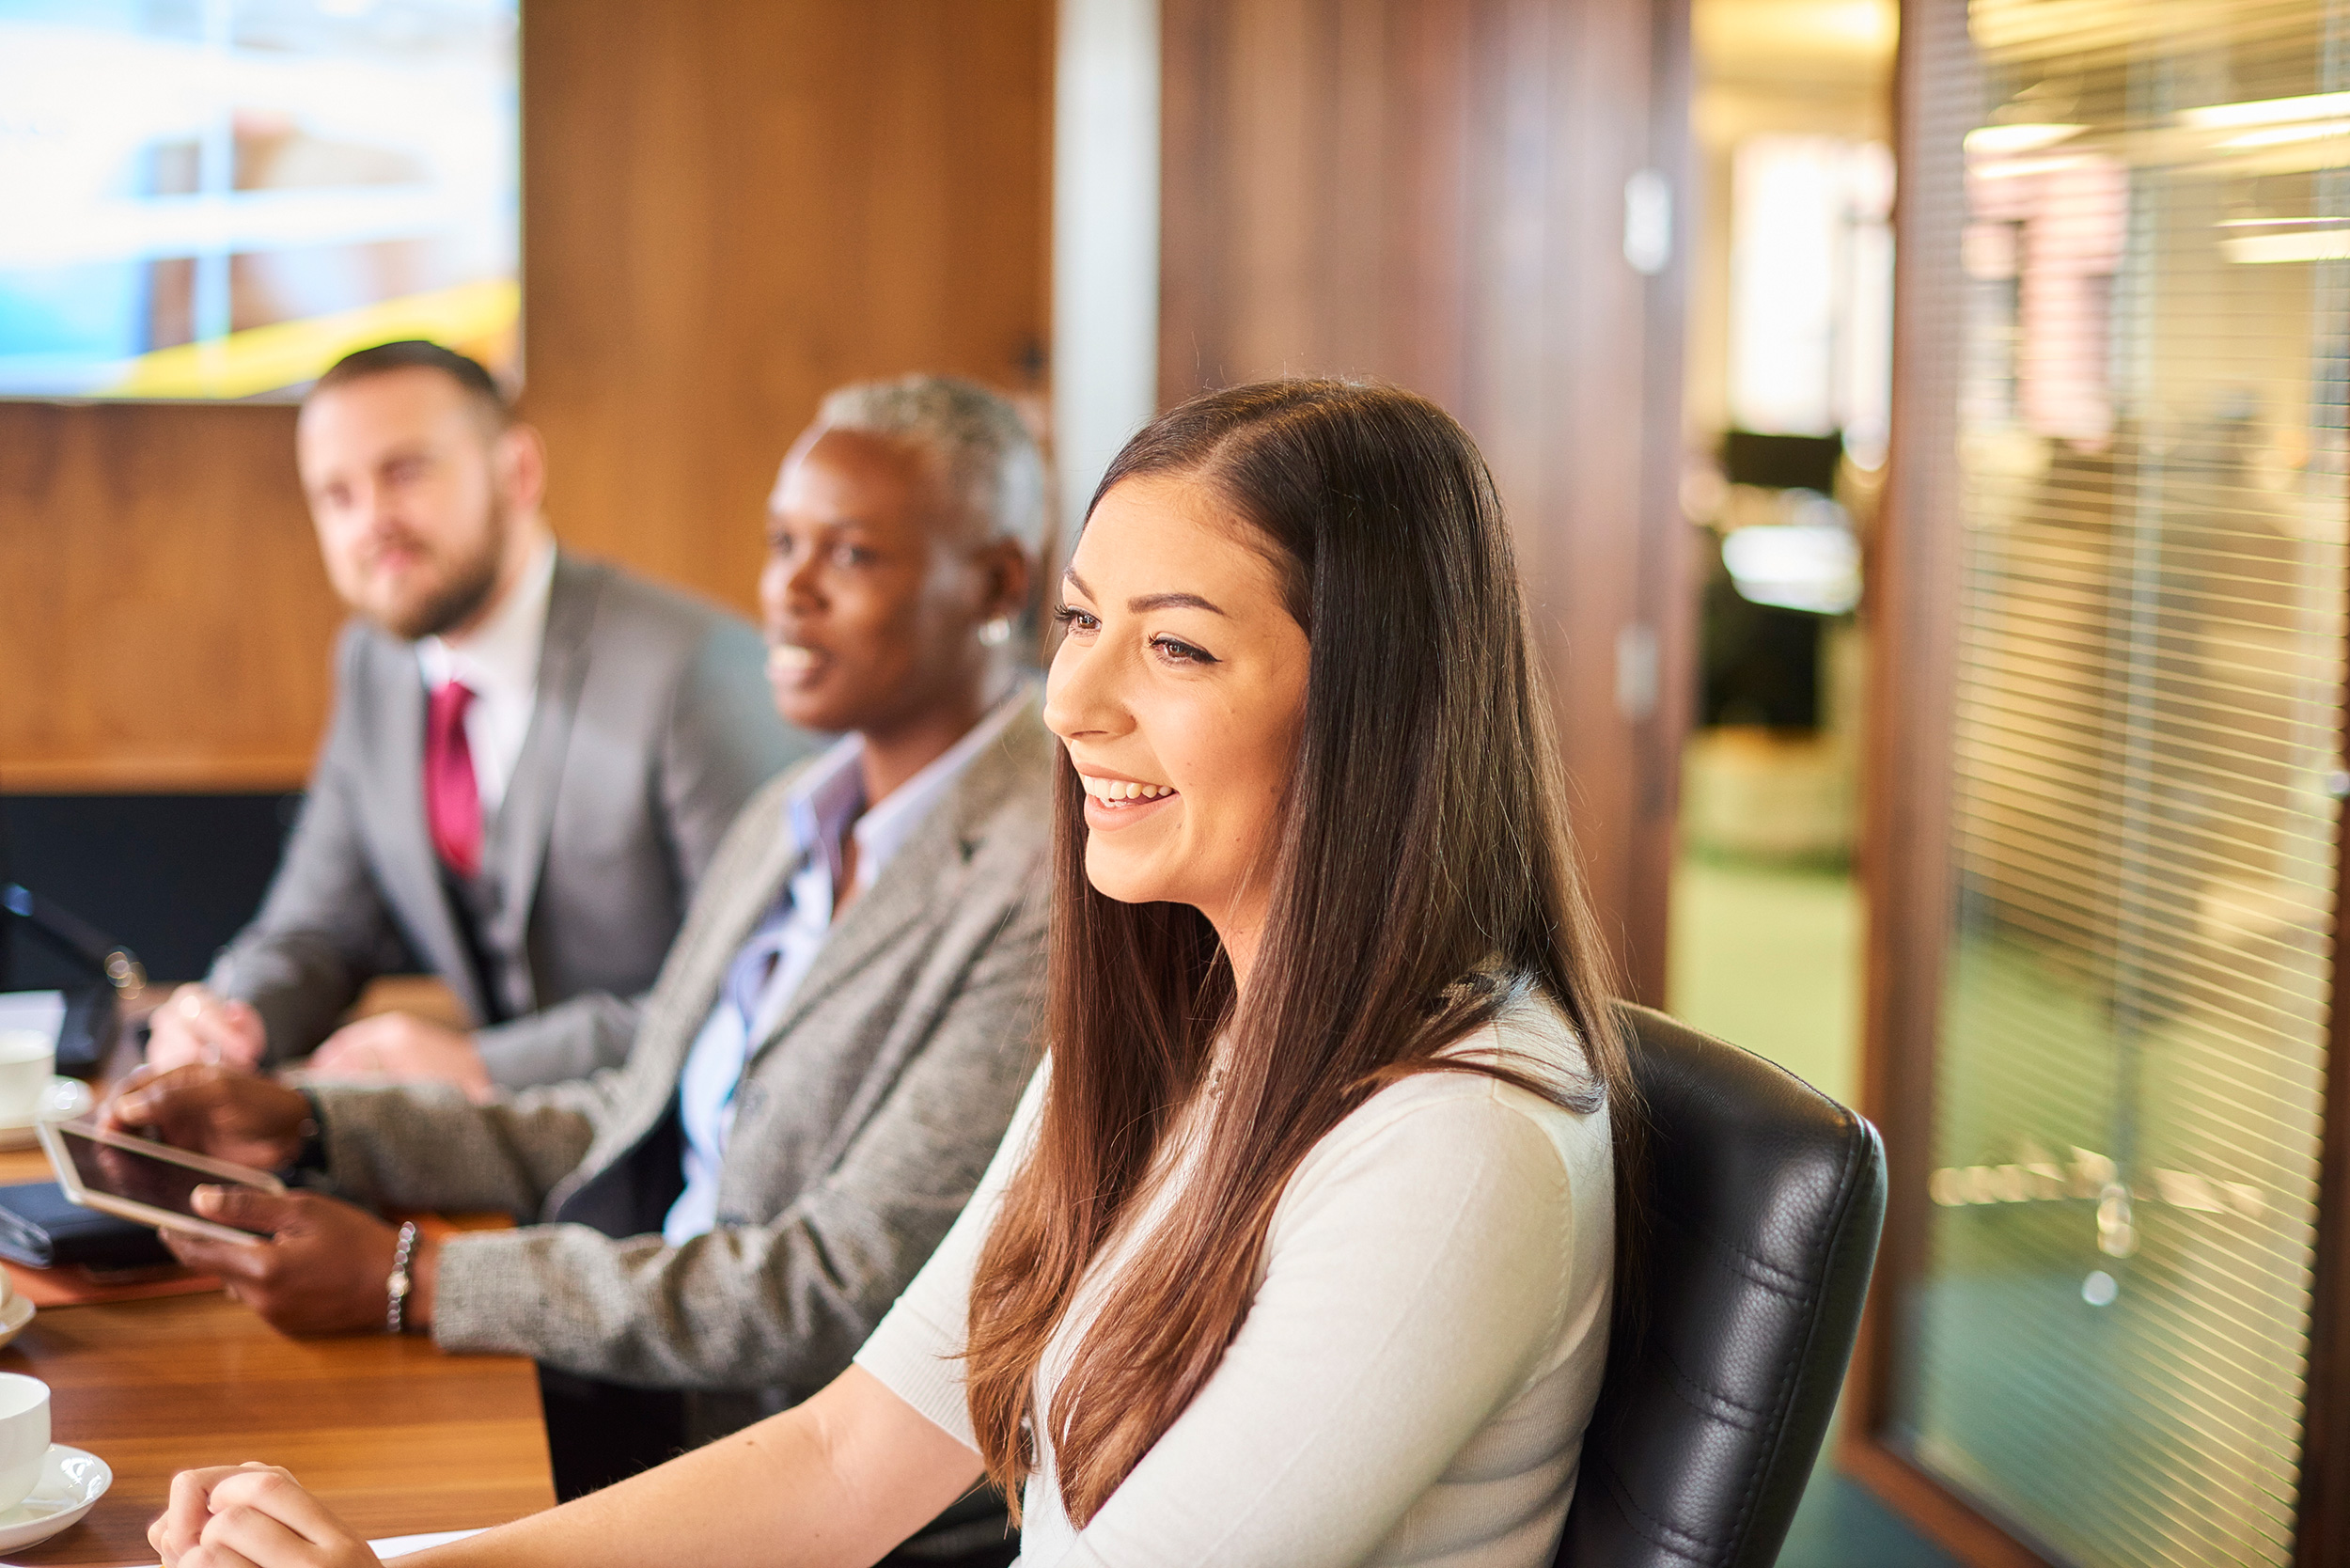 Three people in business attire, two women and a man, sit in a meeting at a conference room table. The Social Security Disability lawyers at Troutman & Troutman know how to appeal a disability benefits denial.